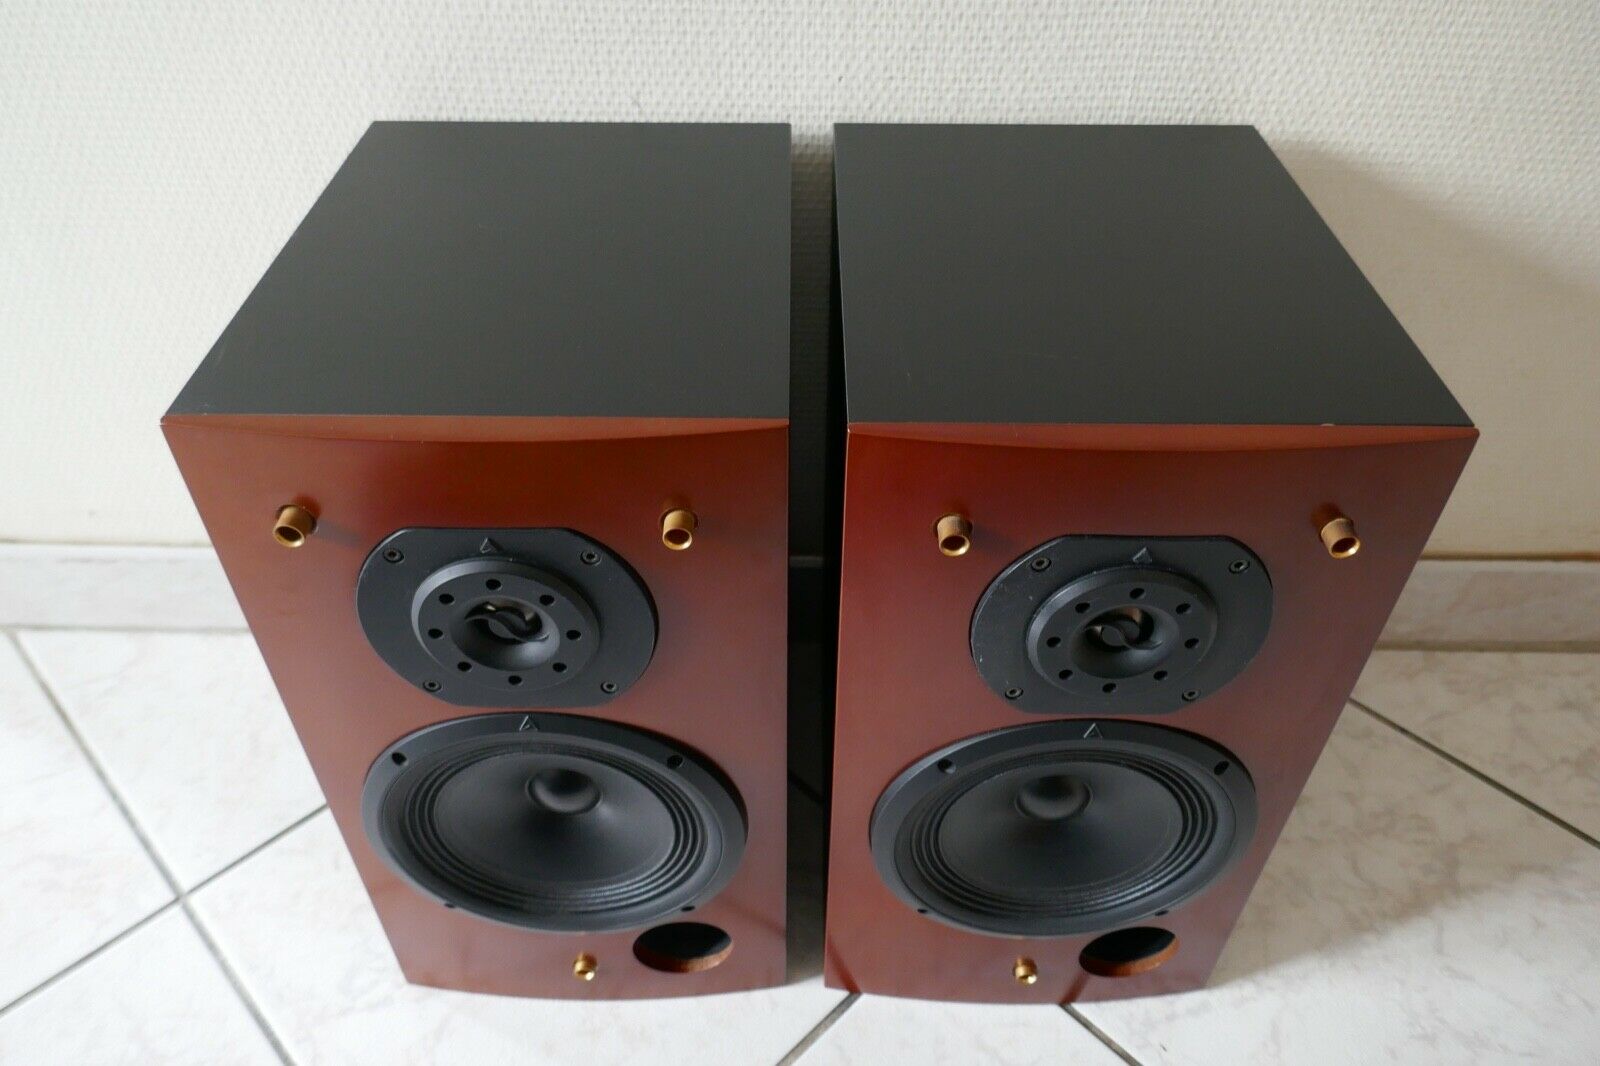 enceintes speakers triangle COMETE XS occasion used